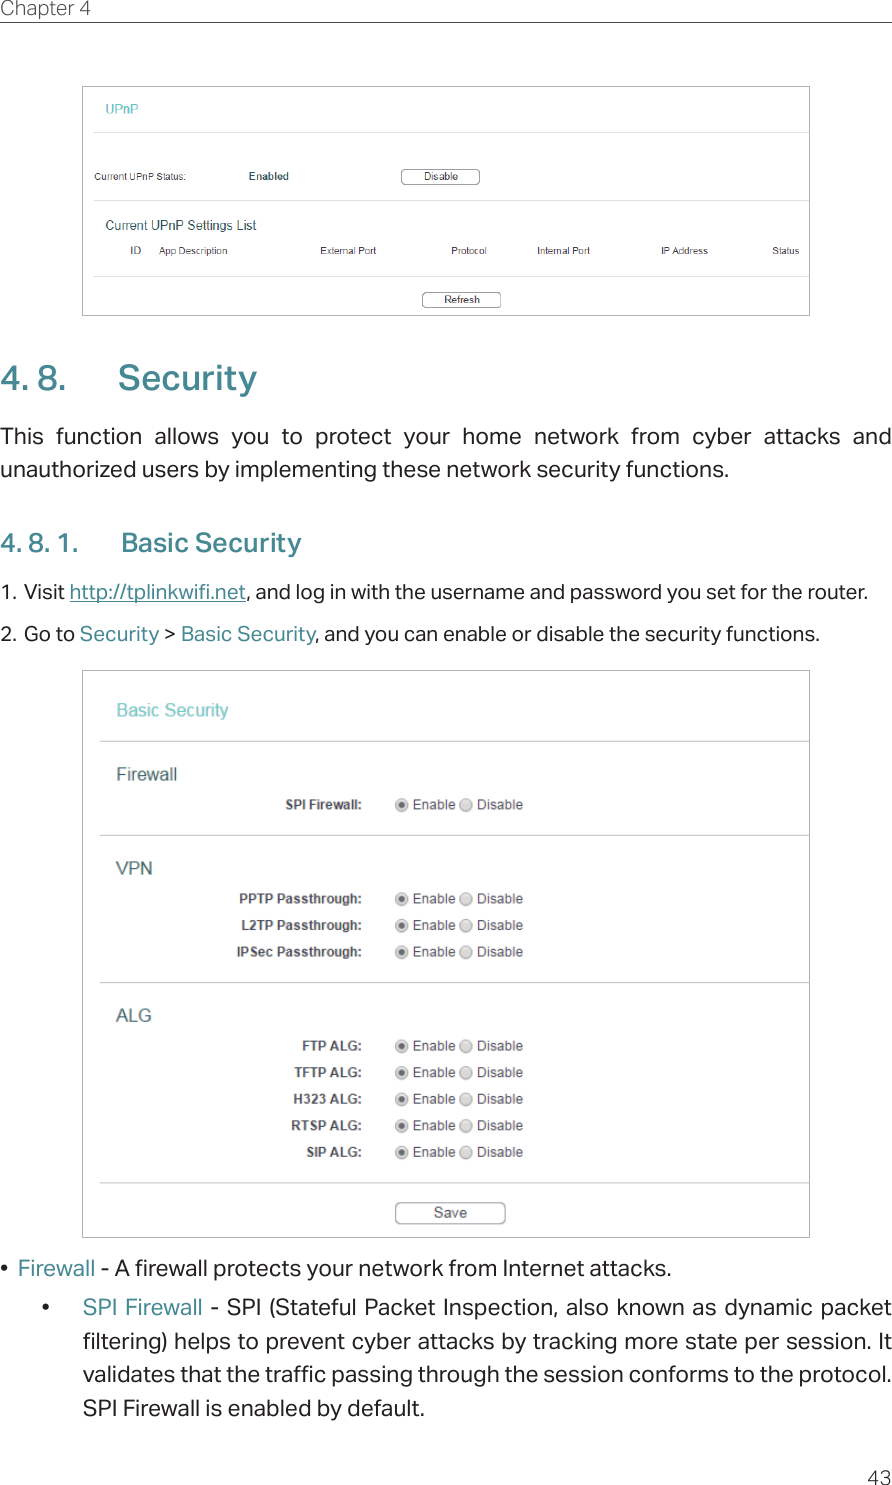 43Chapter 4  4. 8.  SecurityThis function allows you to protect your home network from cyber attacks and unauthorized users by implementing these network security functions.4. 8. 1.  Basic Security1. Visit http://tplinkwifi.net, and log in with the username and password you set for the router.2. Go to Security &gt; Basic Security, and you can enable or disable the security functions.•  Firewall - A firewall protects your network from Internet attacks.•  SPI Firewall - SPI (Stateful Packet Inspection, also known as dynamic packet filtering) helps to prevent cyber attacks by tracking more state per session. It validates that the traffic passing through the session conforms to the protocol. SPI Firewall is enabled by default.